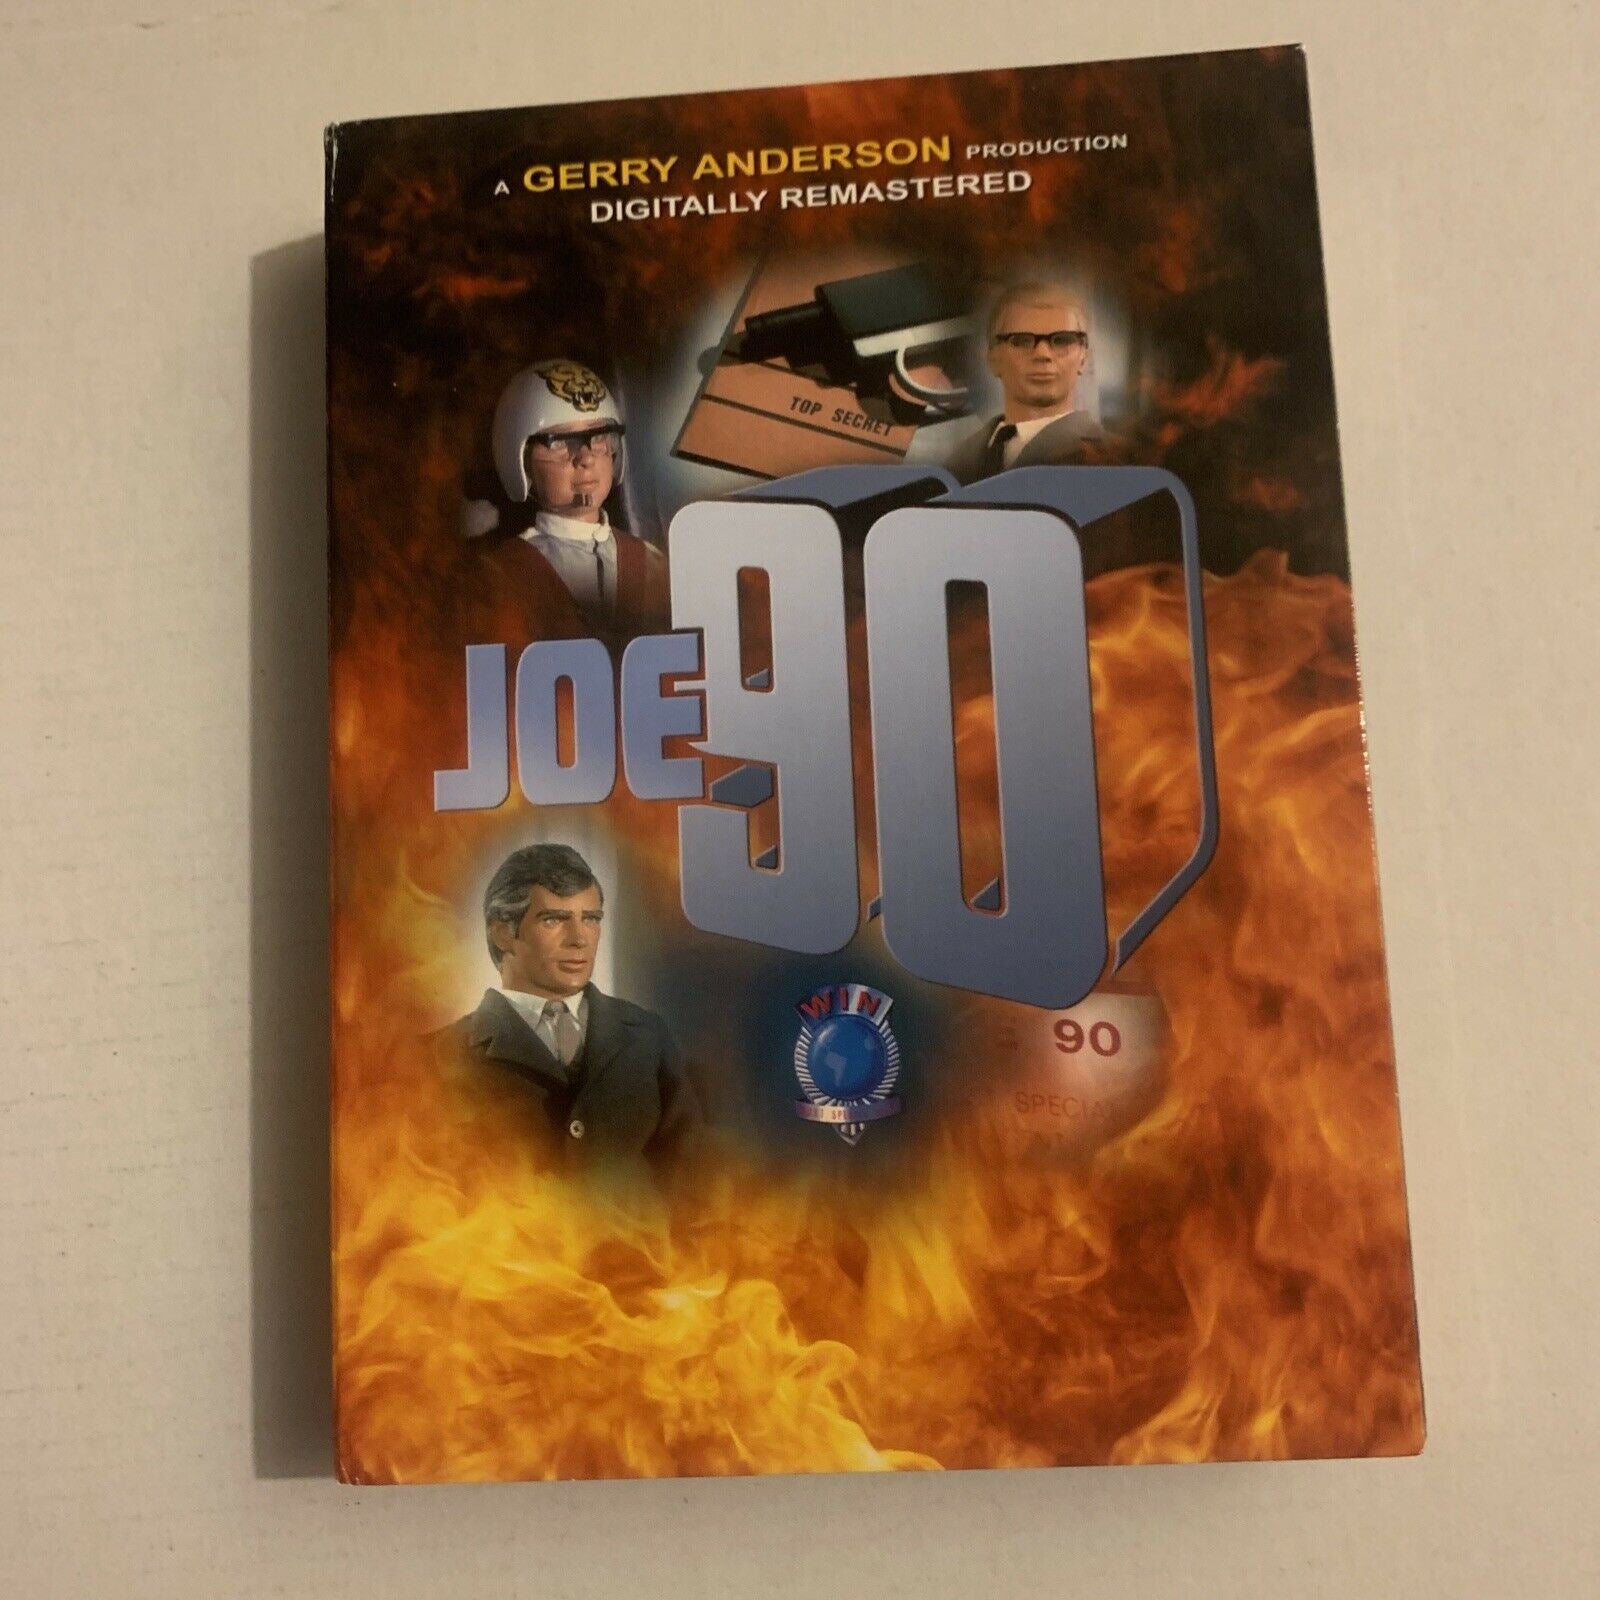 Joe 90 - Complete Series - Collector's Edition (DVD